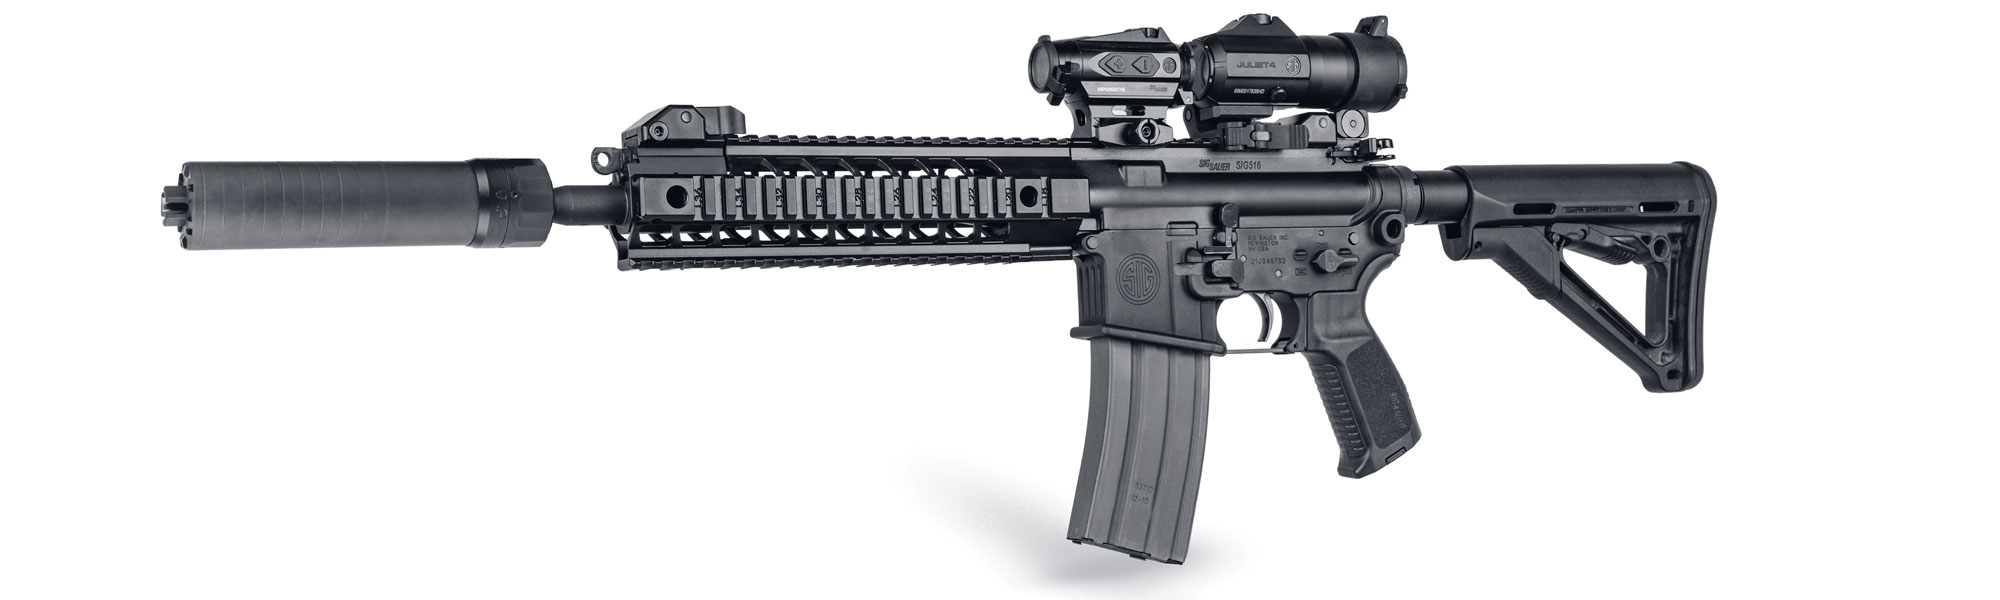 The SIG 516 G2 is featured with mounted optic, magnifier and suppressor. 